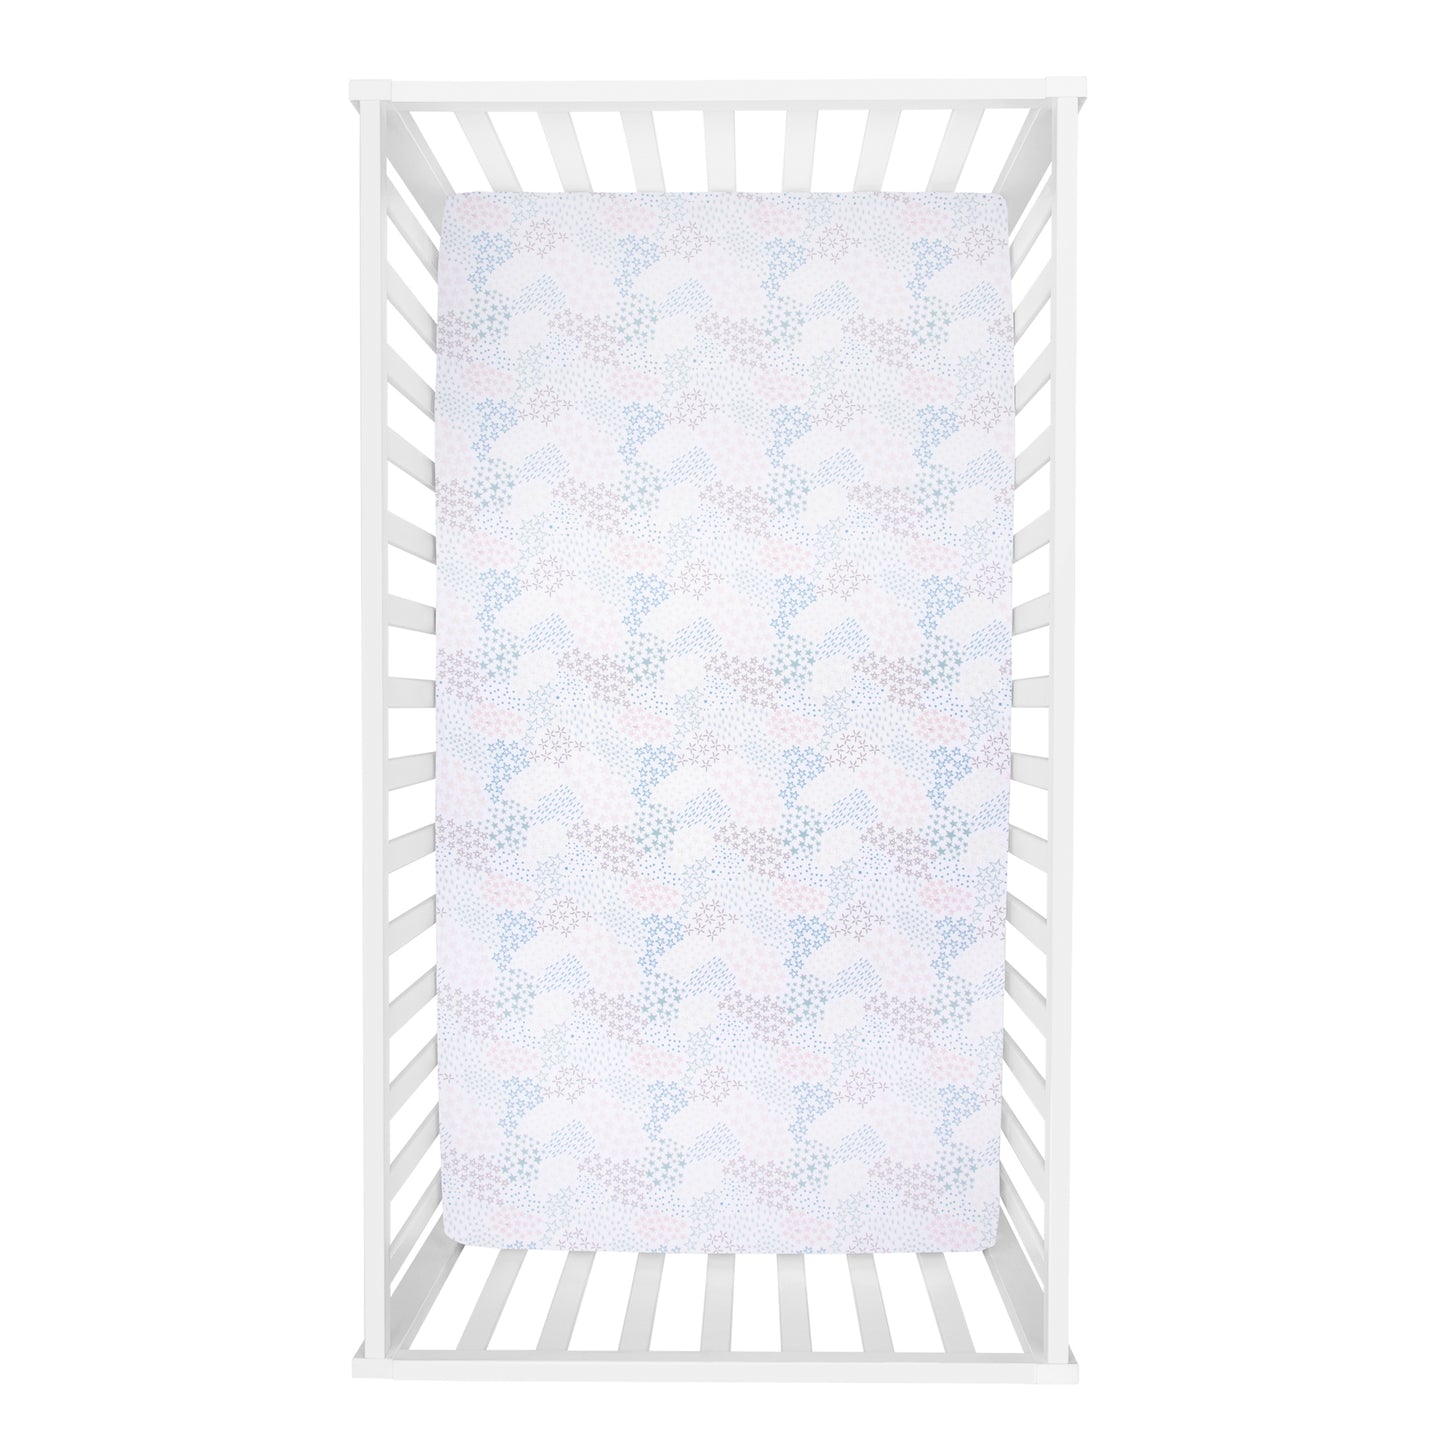 Trend Lab Starry Night Fitted Crib Sheet pictured in a white crib from top view.